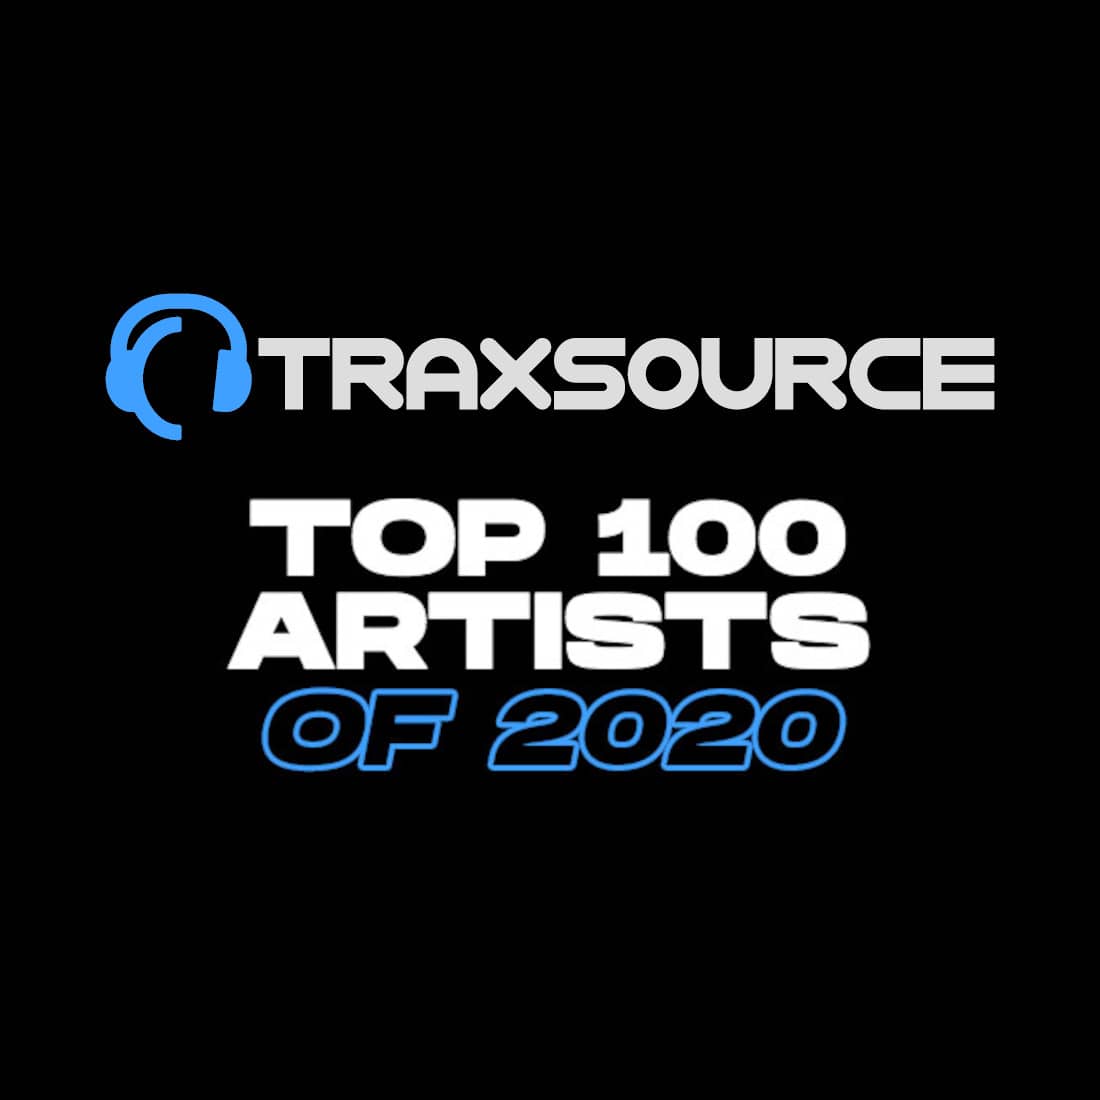 Traxsource Top 100 Artists of 2020 with Weekly Shows on House FM!